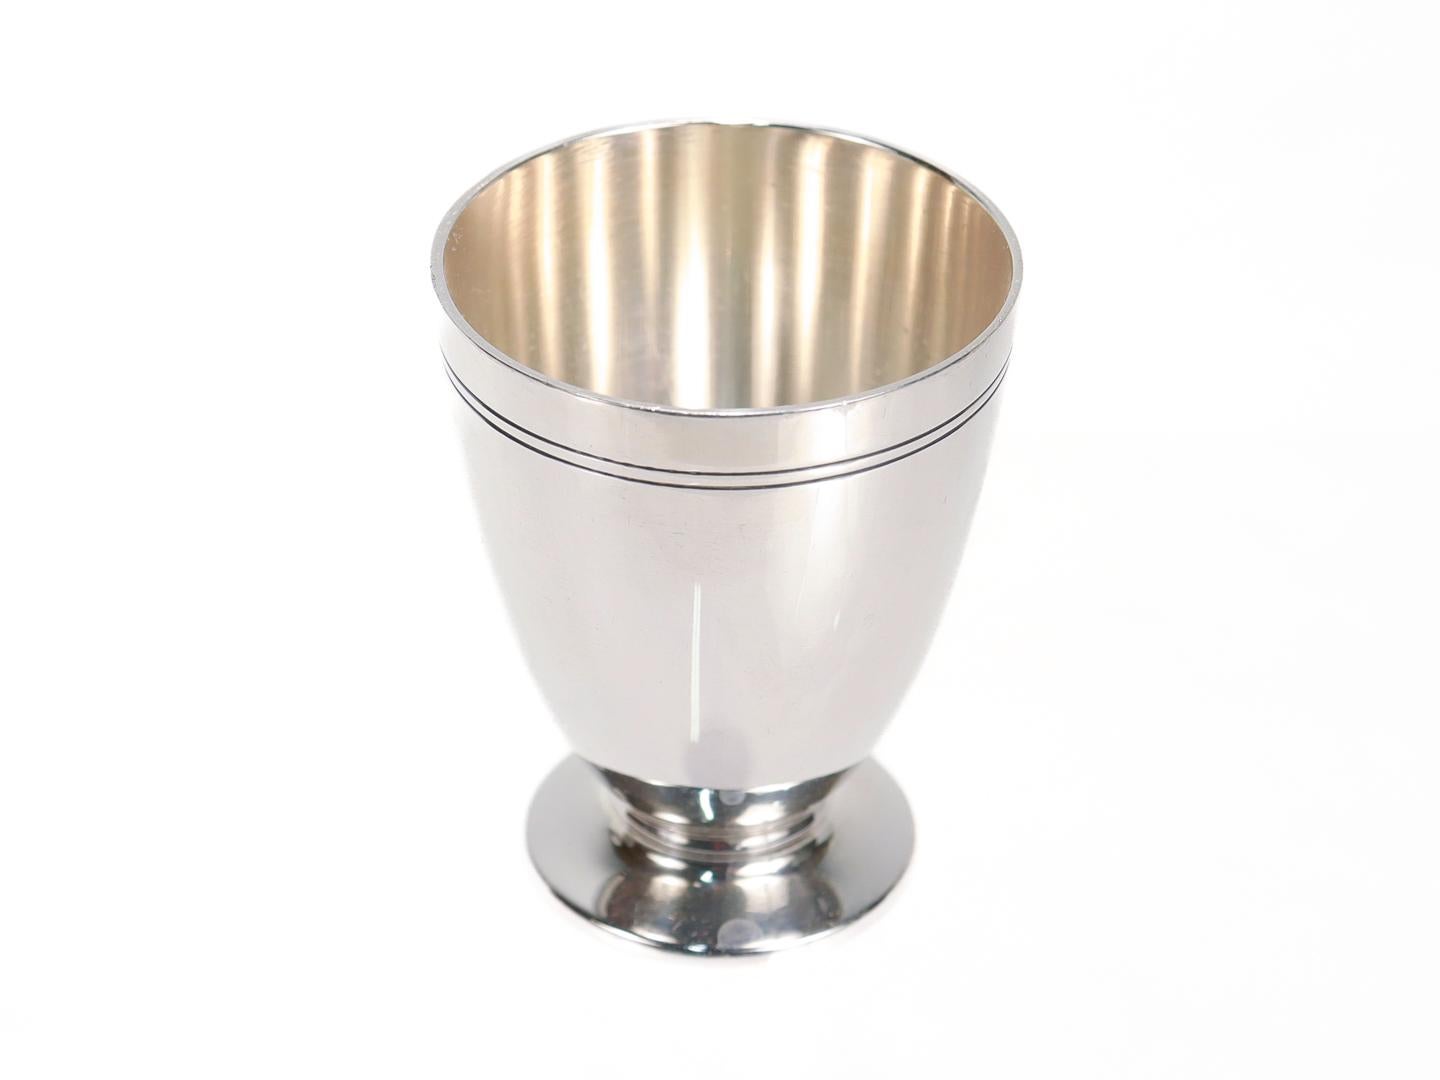 Set of 12 Tiffany & Co Art Deco Sterling Silver Art Deco Shot Cups or Cordials For Sale 1